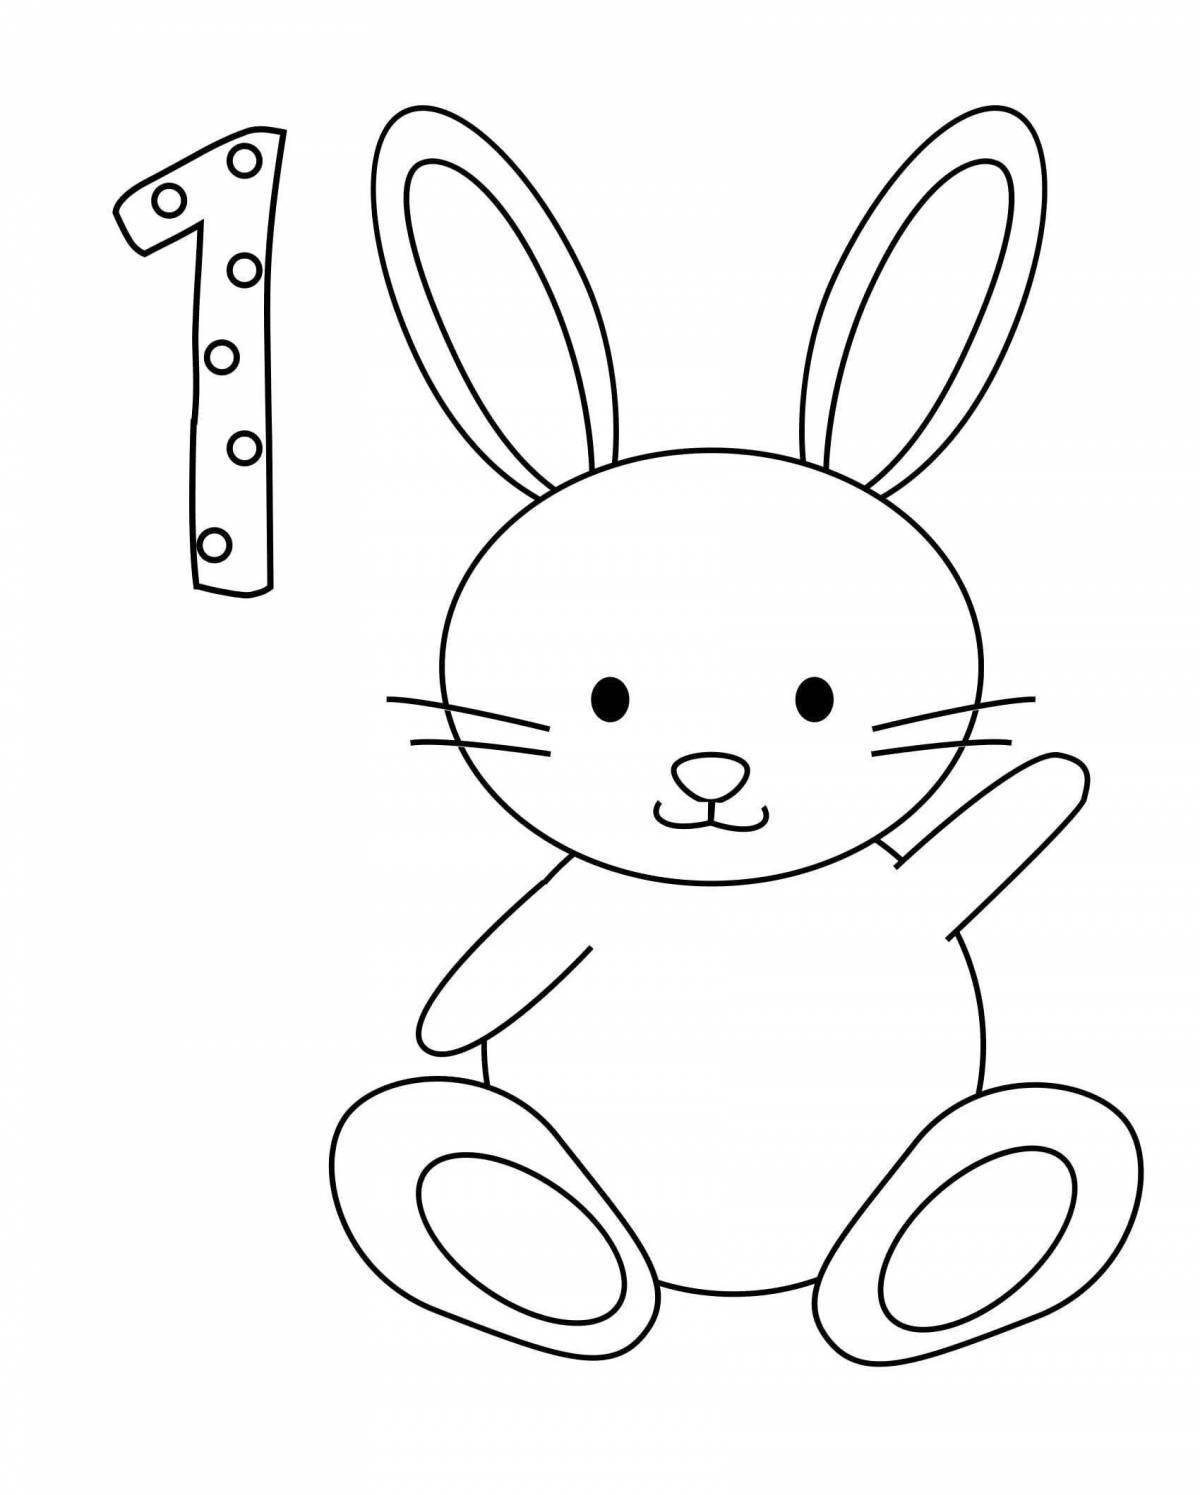 Coloring happy hare for kids